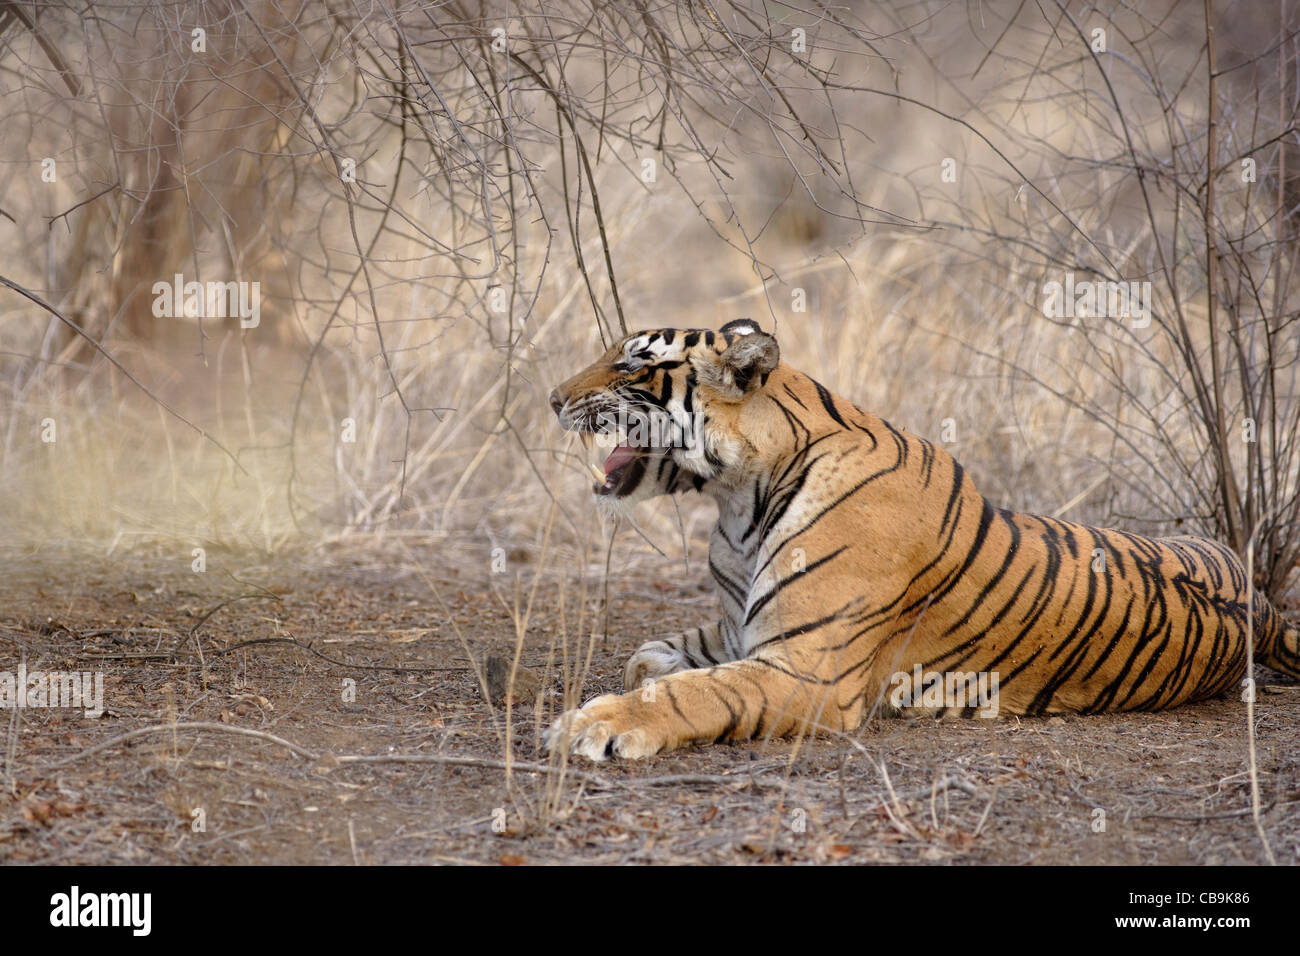 A Bengal Tiger Roaring in the wild forest of Ranthambhore, Rajasthan, India. ( Panthera Tigris ) Stock Photo